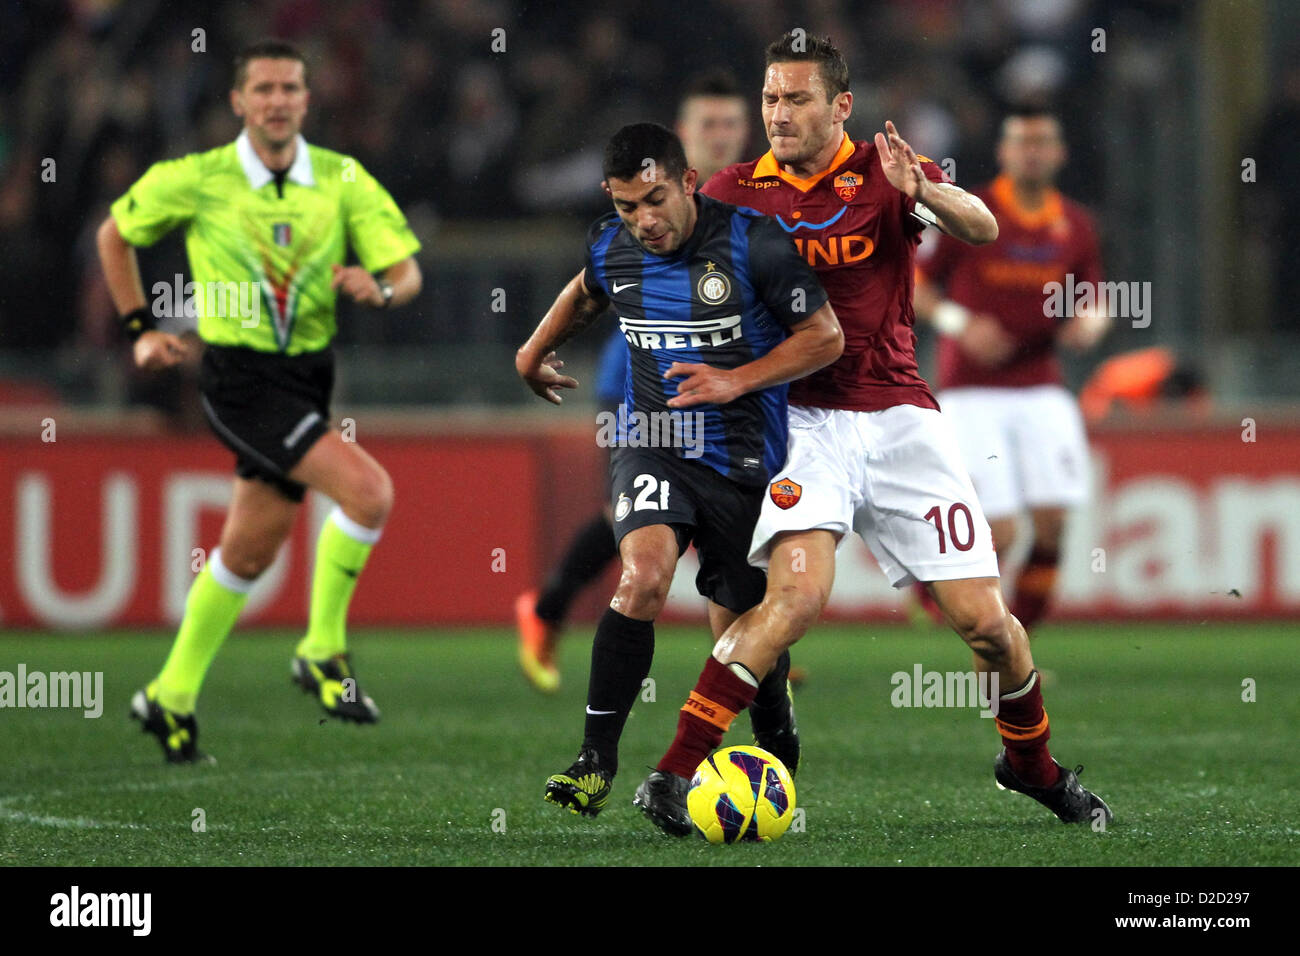 20.01.2013 Rome, Italy. Francesco Totti and Walter Gargano in action during the Serie A game between Roma and Inter Milan from the Stadio Olympico. Stock Photo